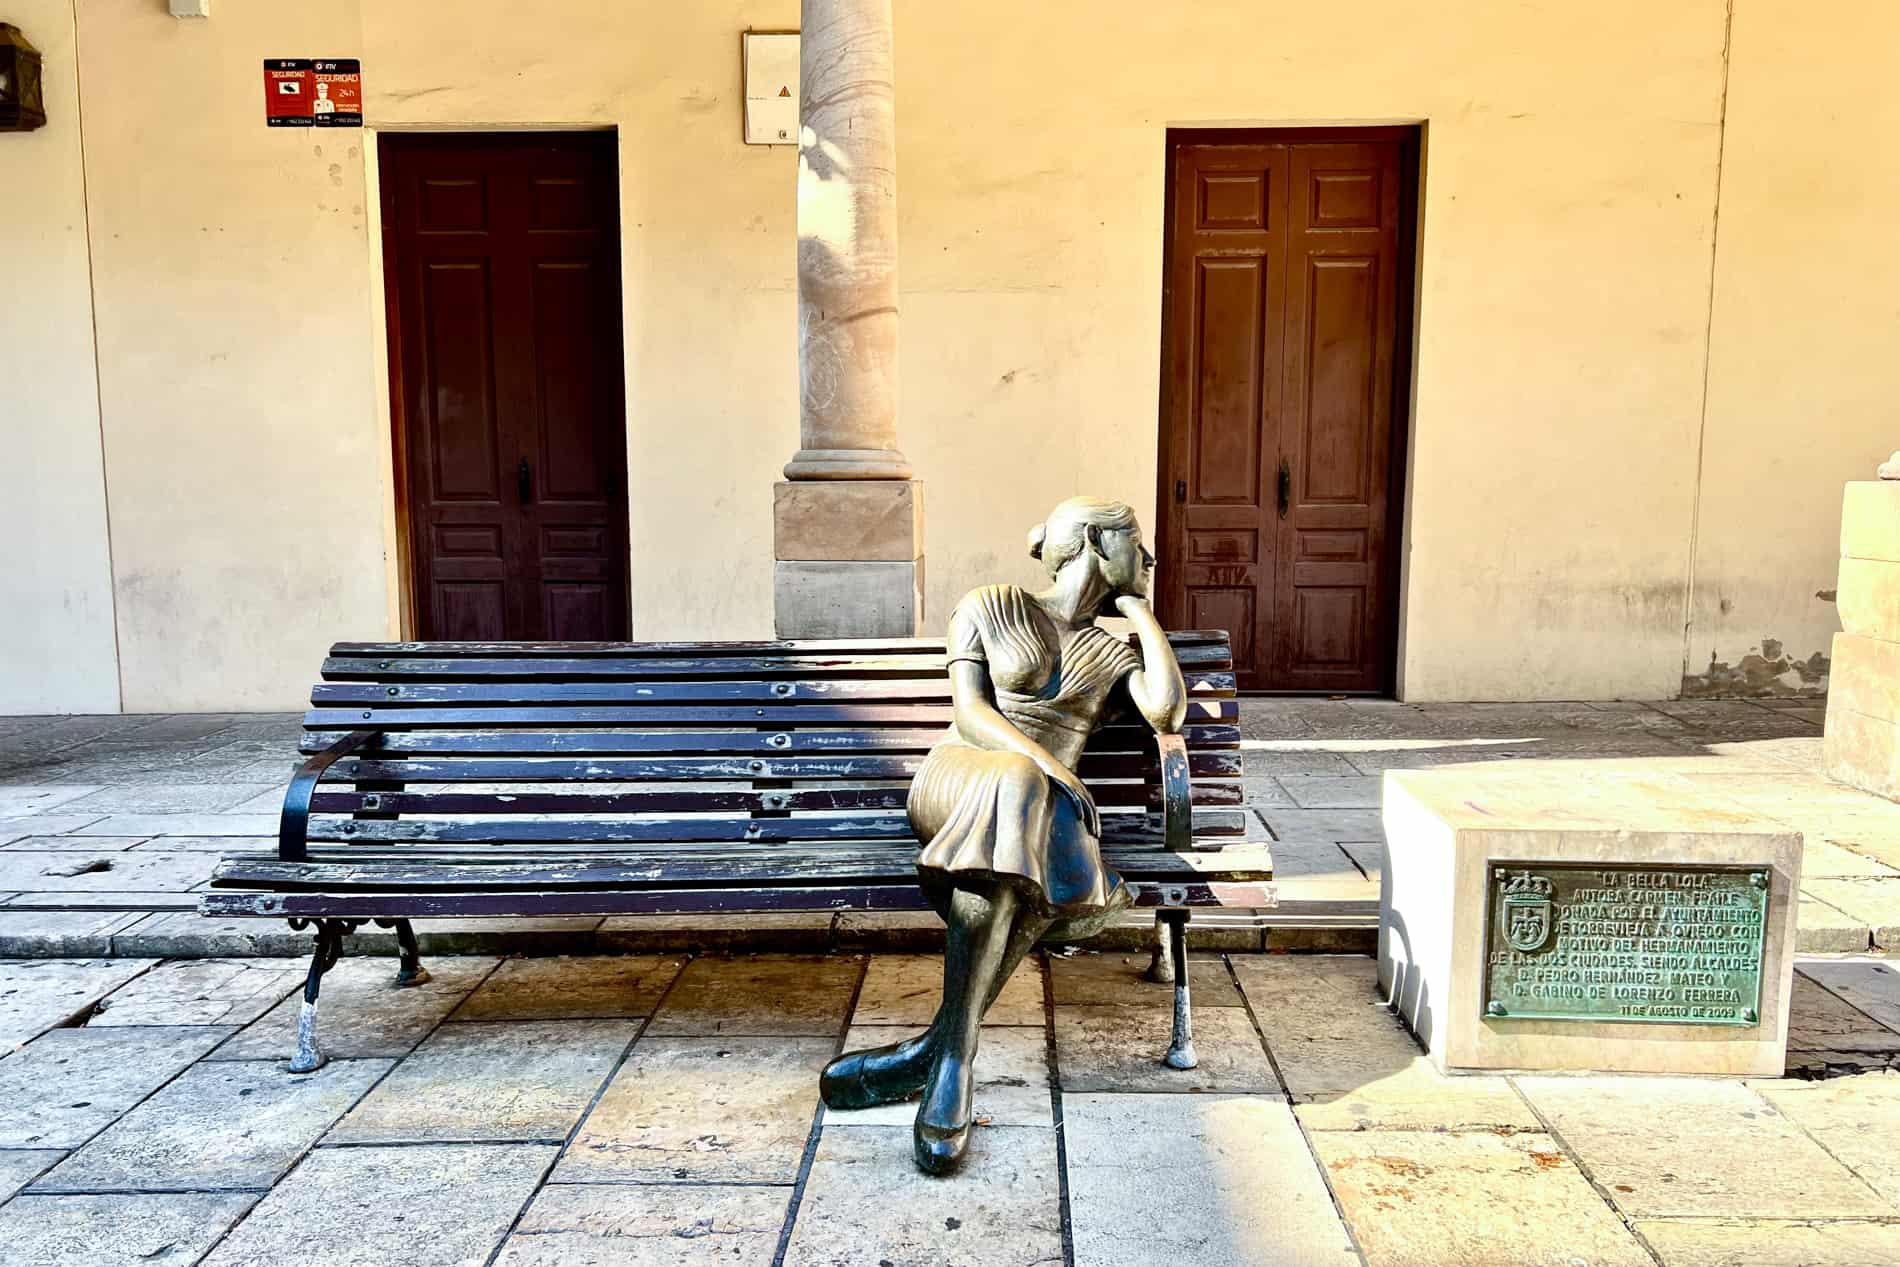 The 'La Bella Lola' statue in Oviedo of a lady sitting on the bench looking longingly to the distance. 